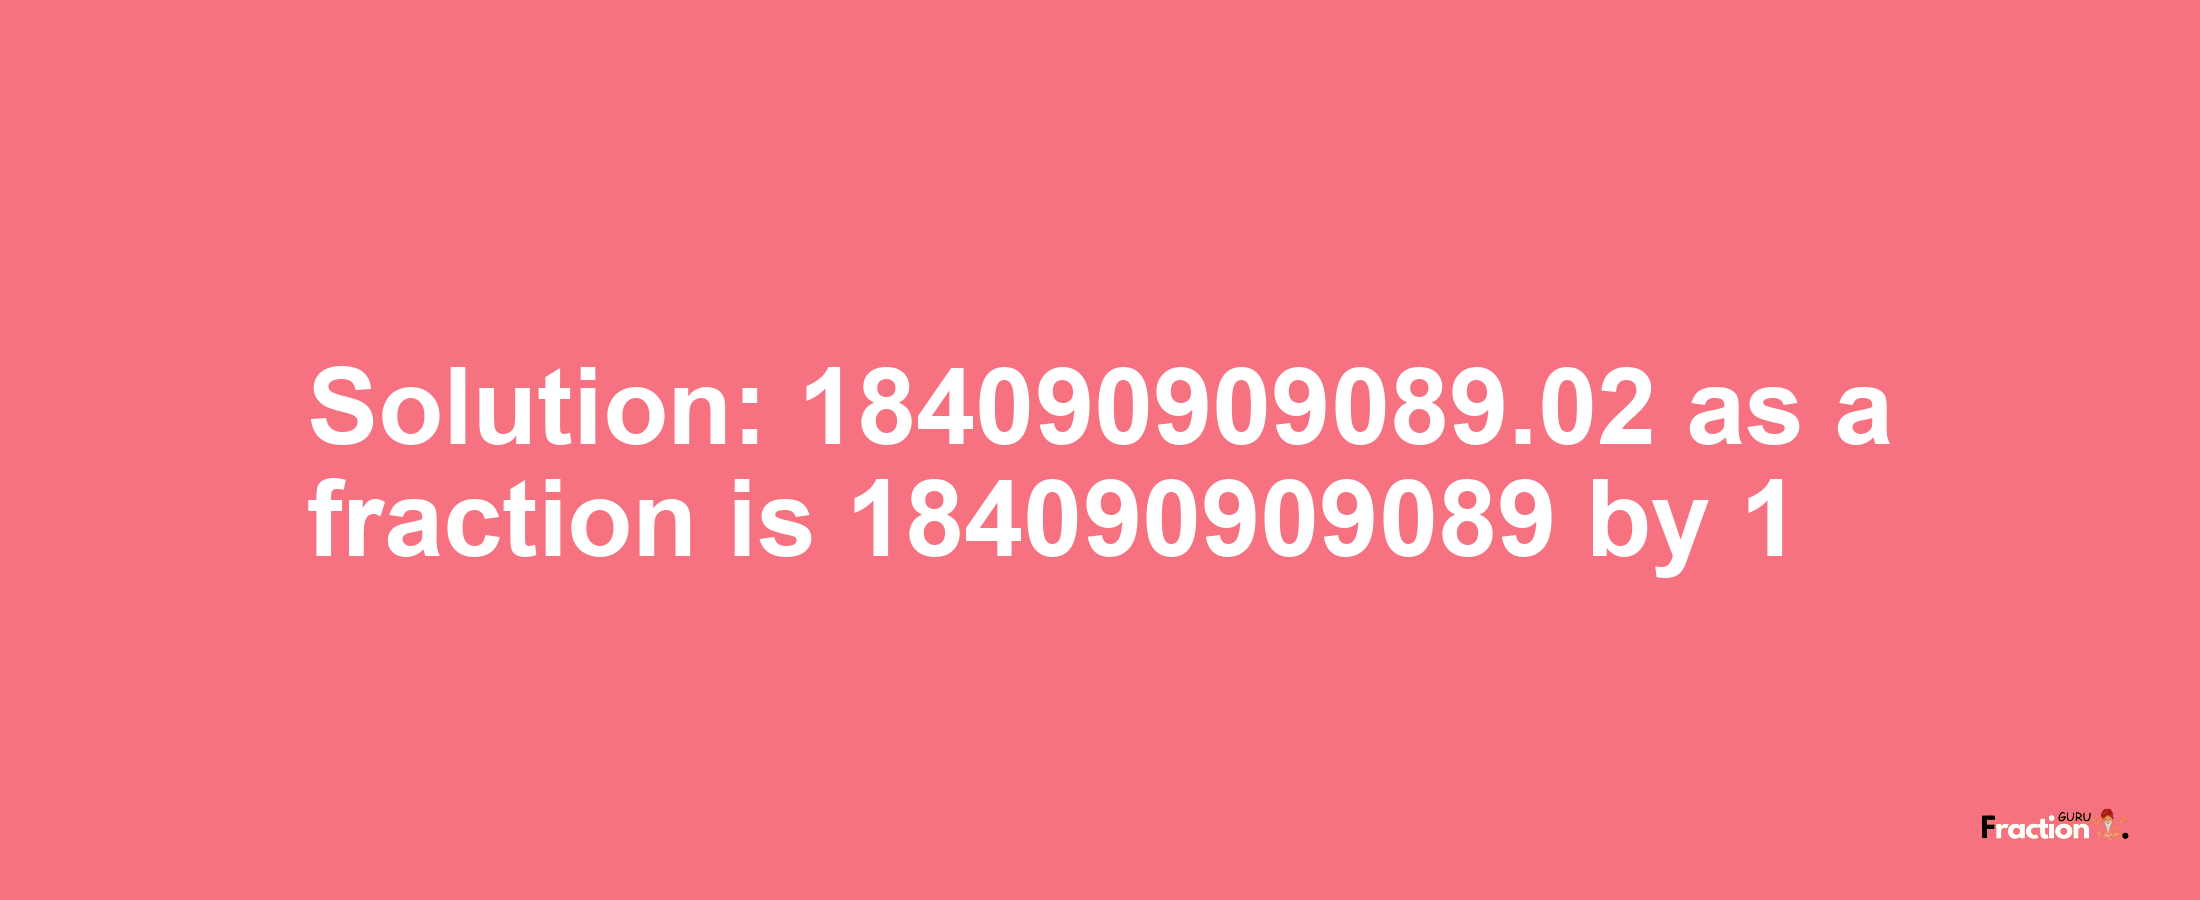 Solution:184090909089.02 as a fraction is 184090909089/1